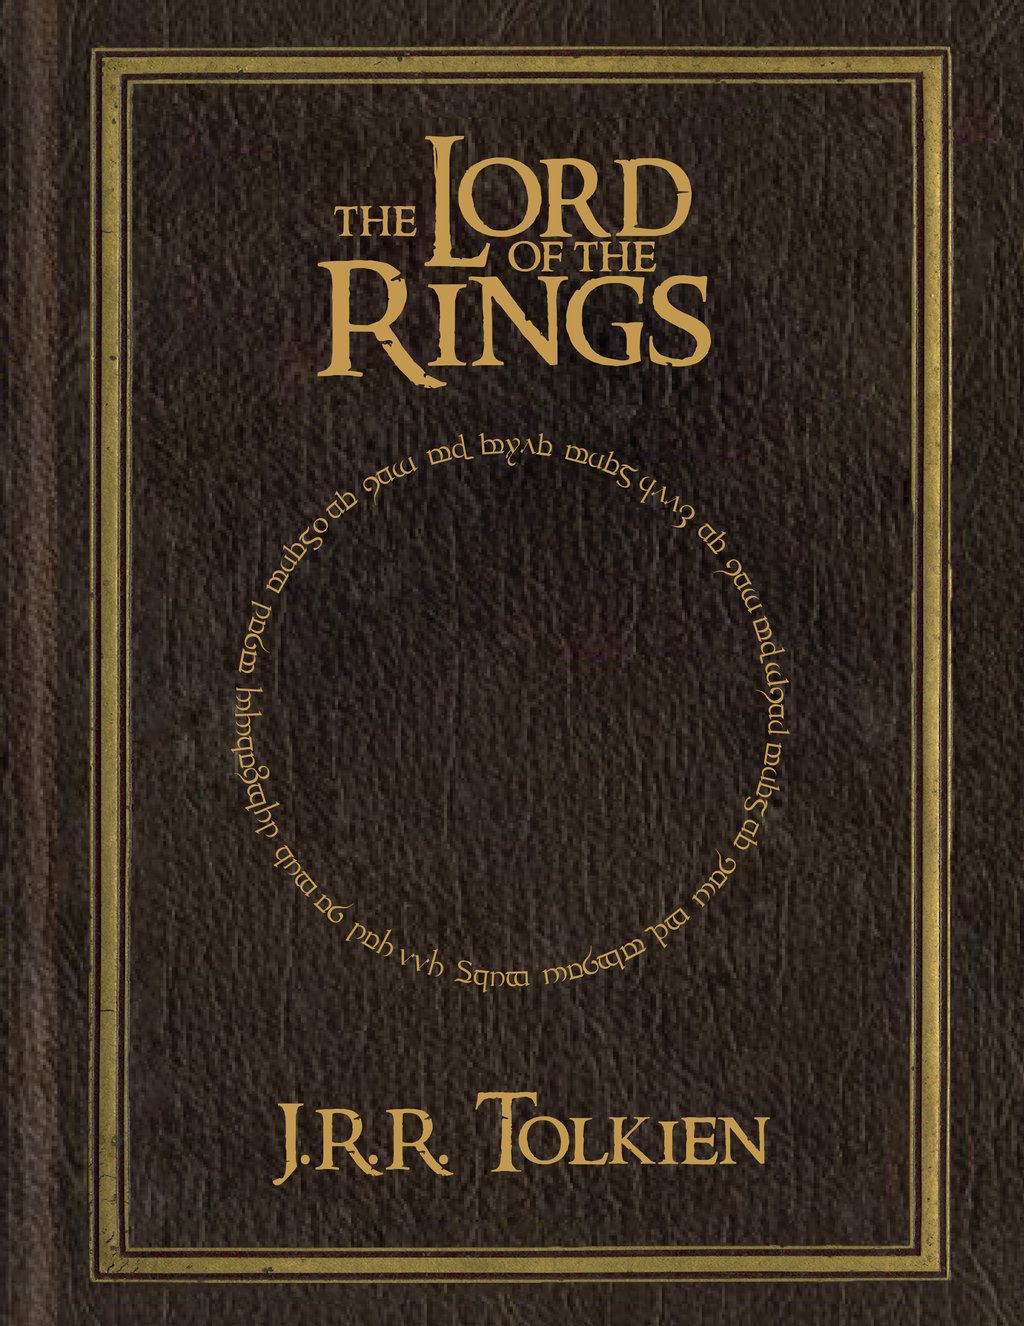 the-lord-of-the-rings-book-cover.jpg